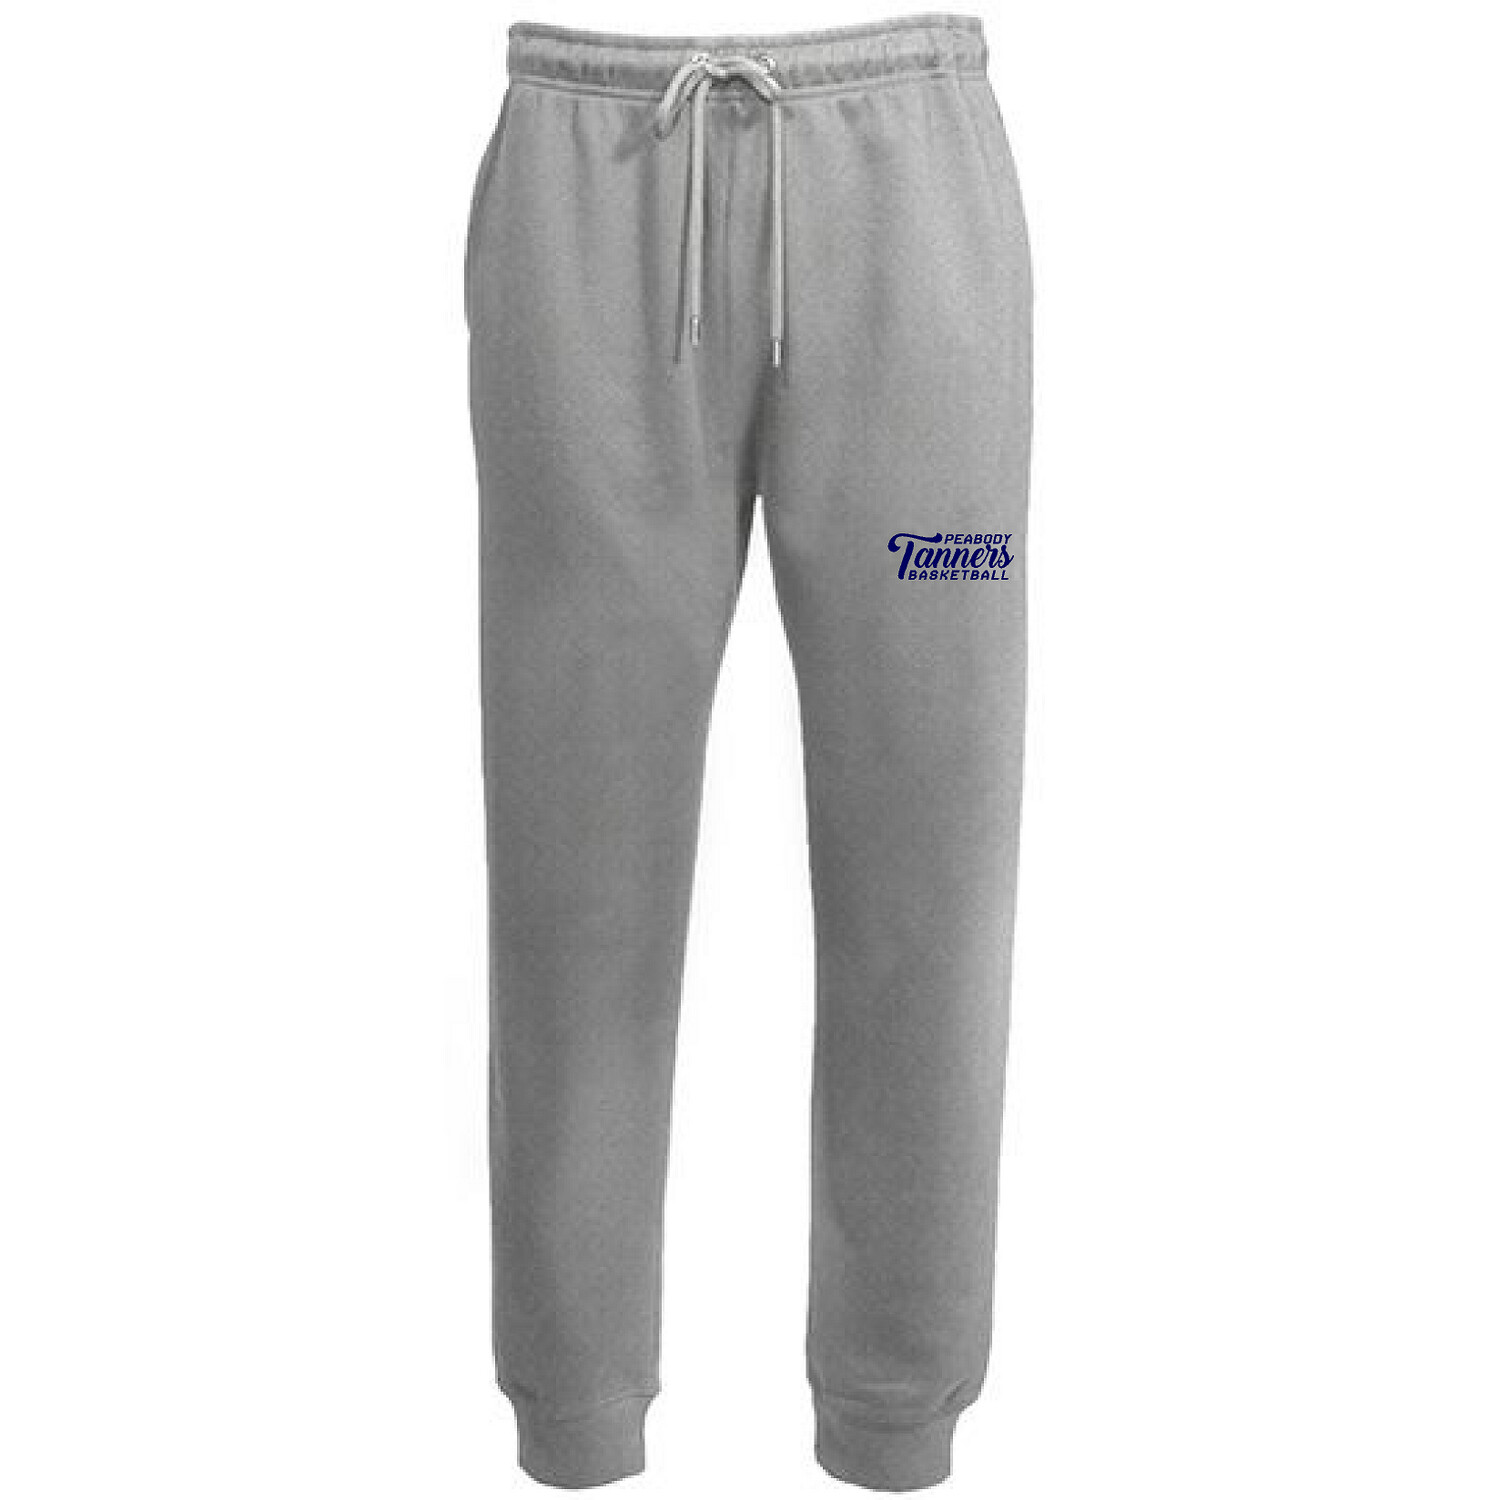 Pennant Brand Tanners Basketball Jogger Sweatpants